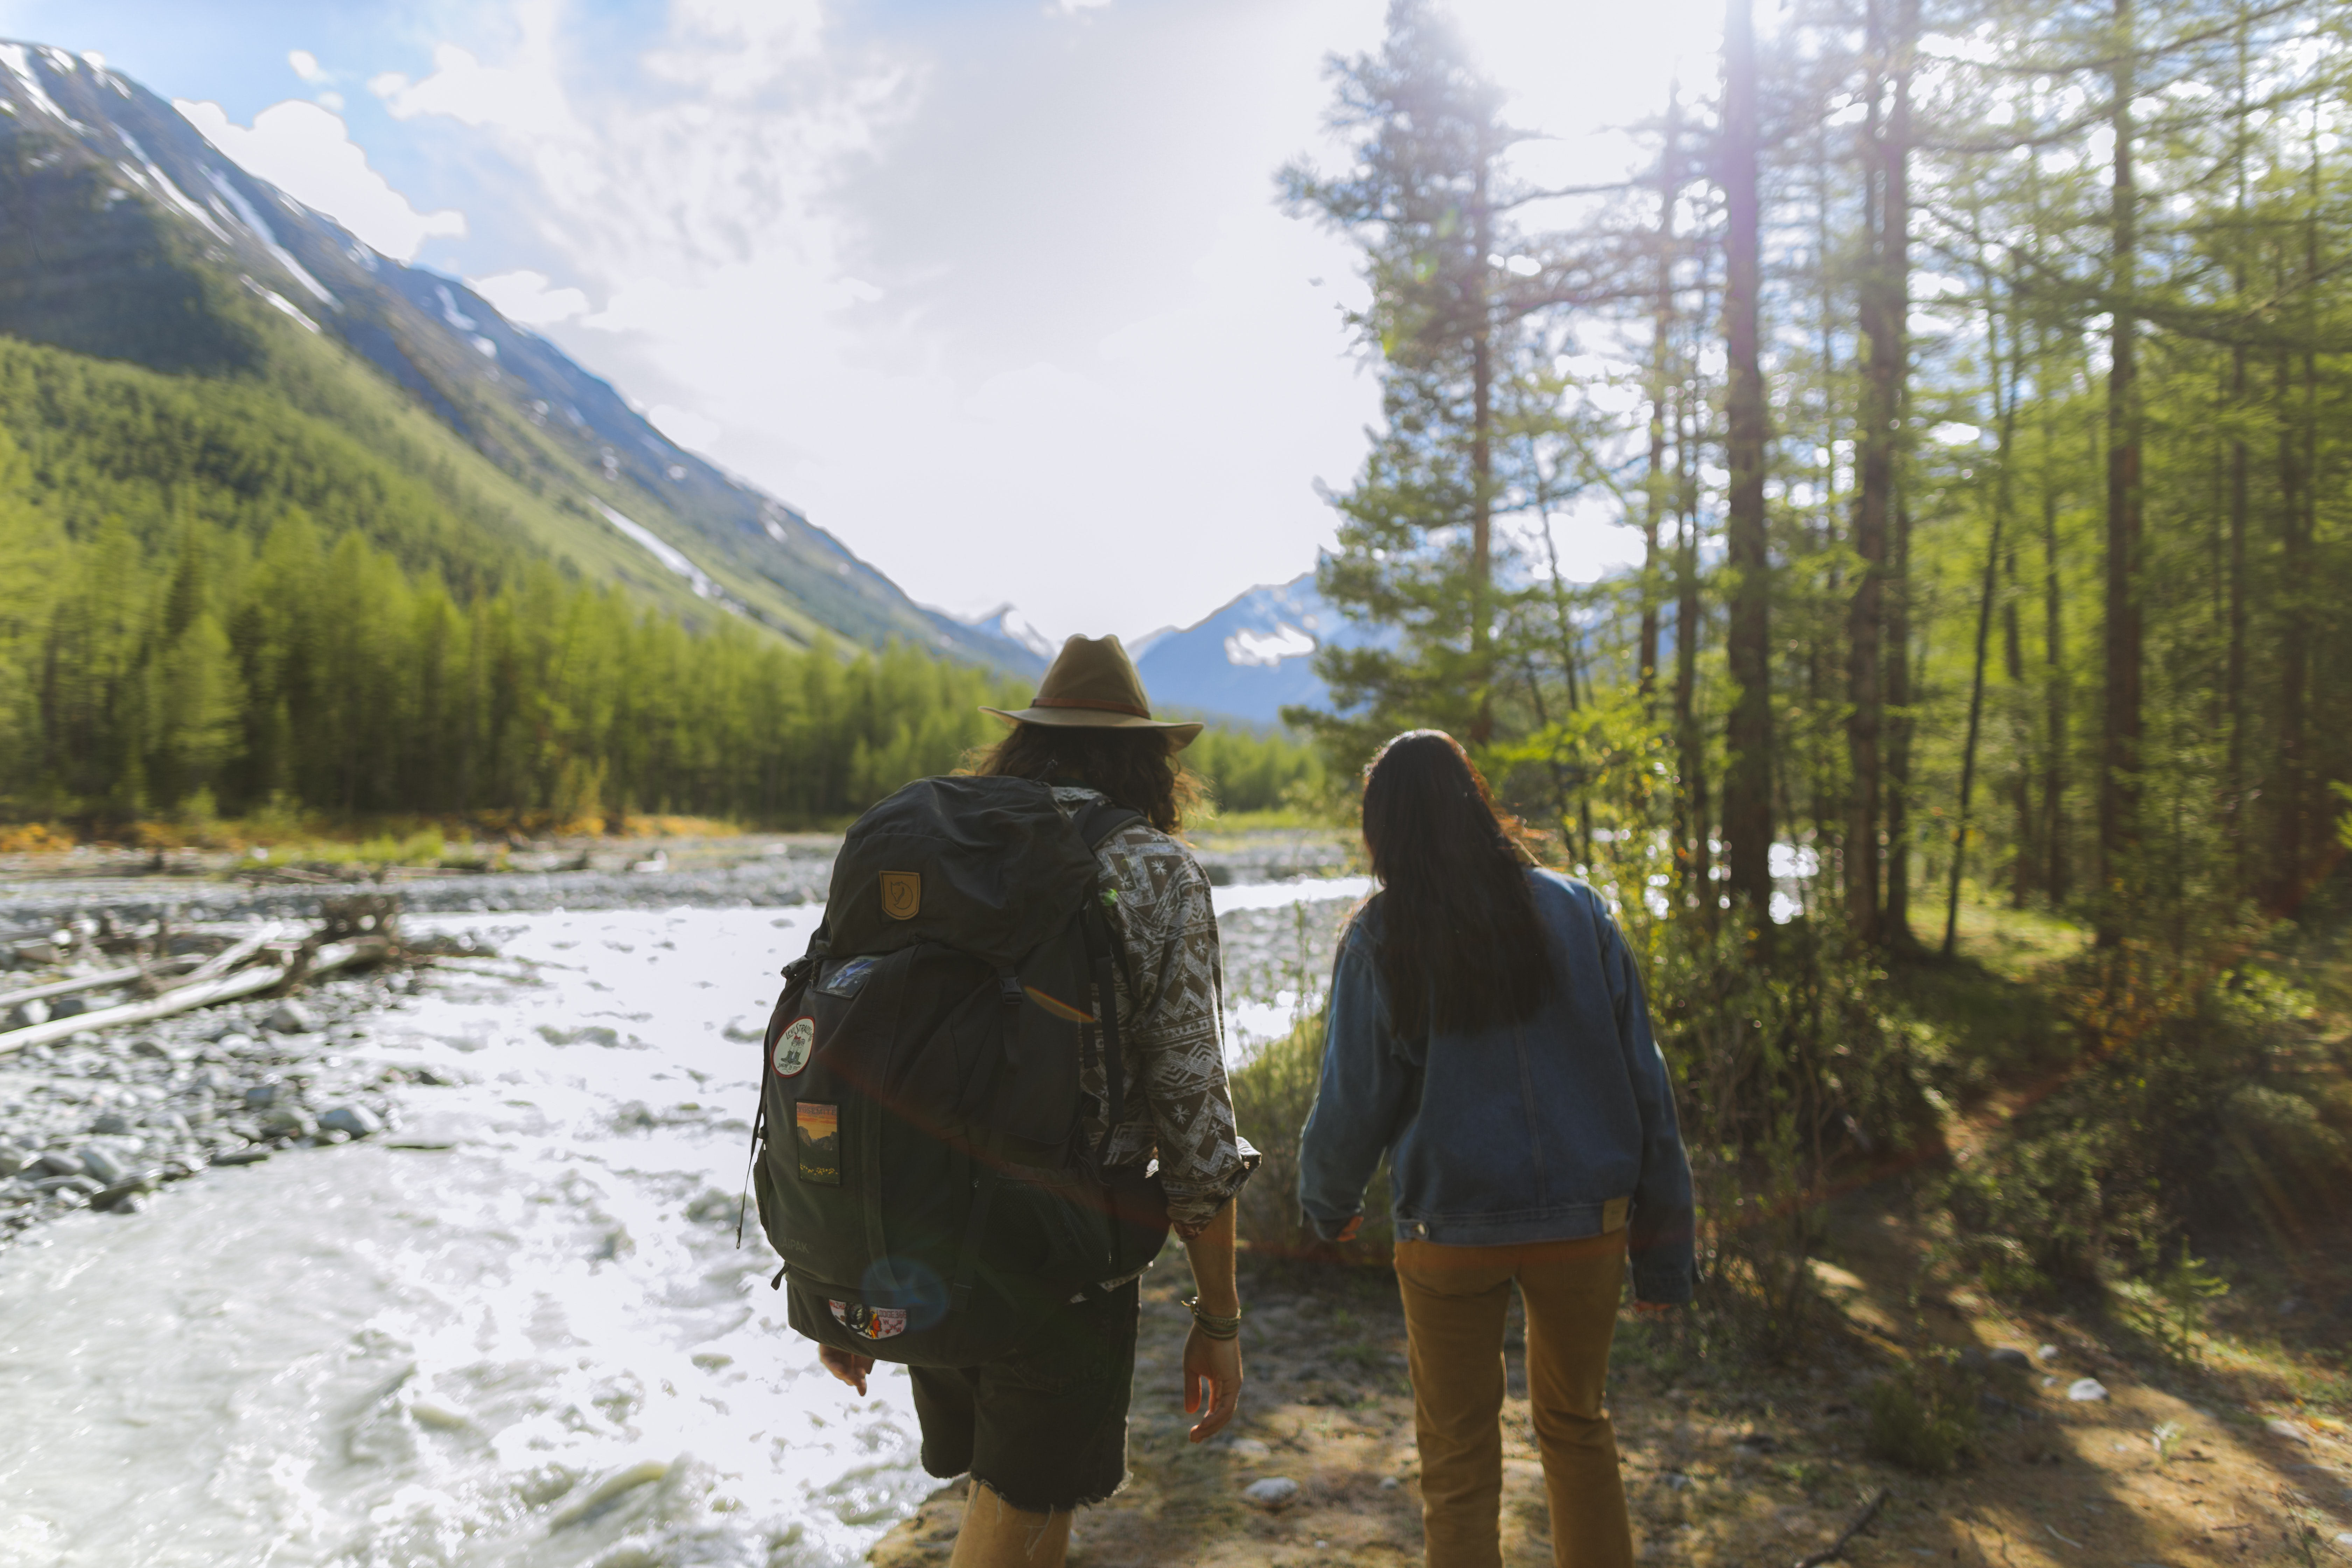 A couple exploring the wilderness. | Source: Pexels